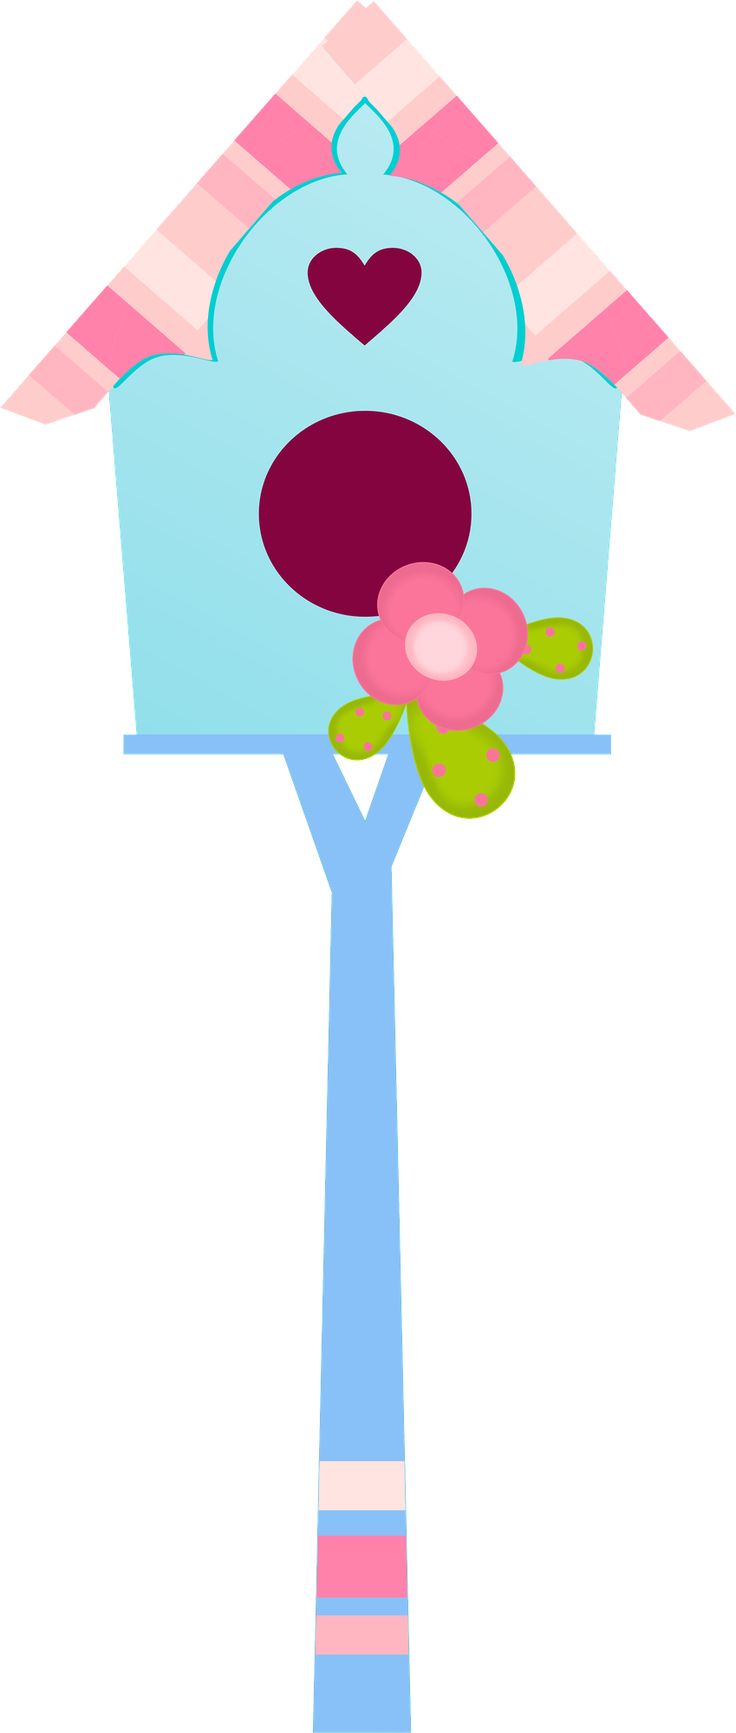 Image of birdhouse clipart 1 .